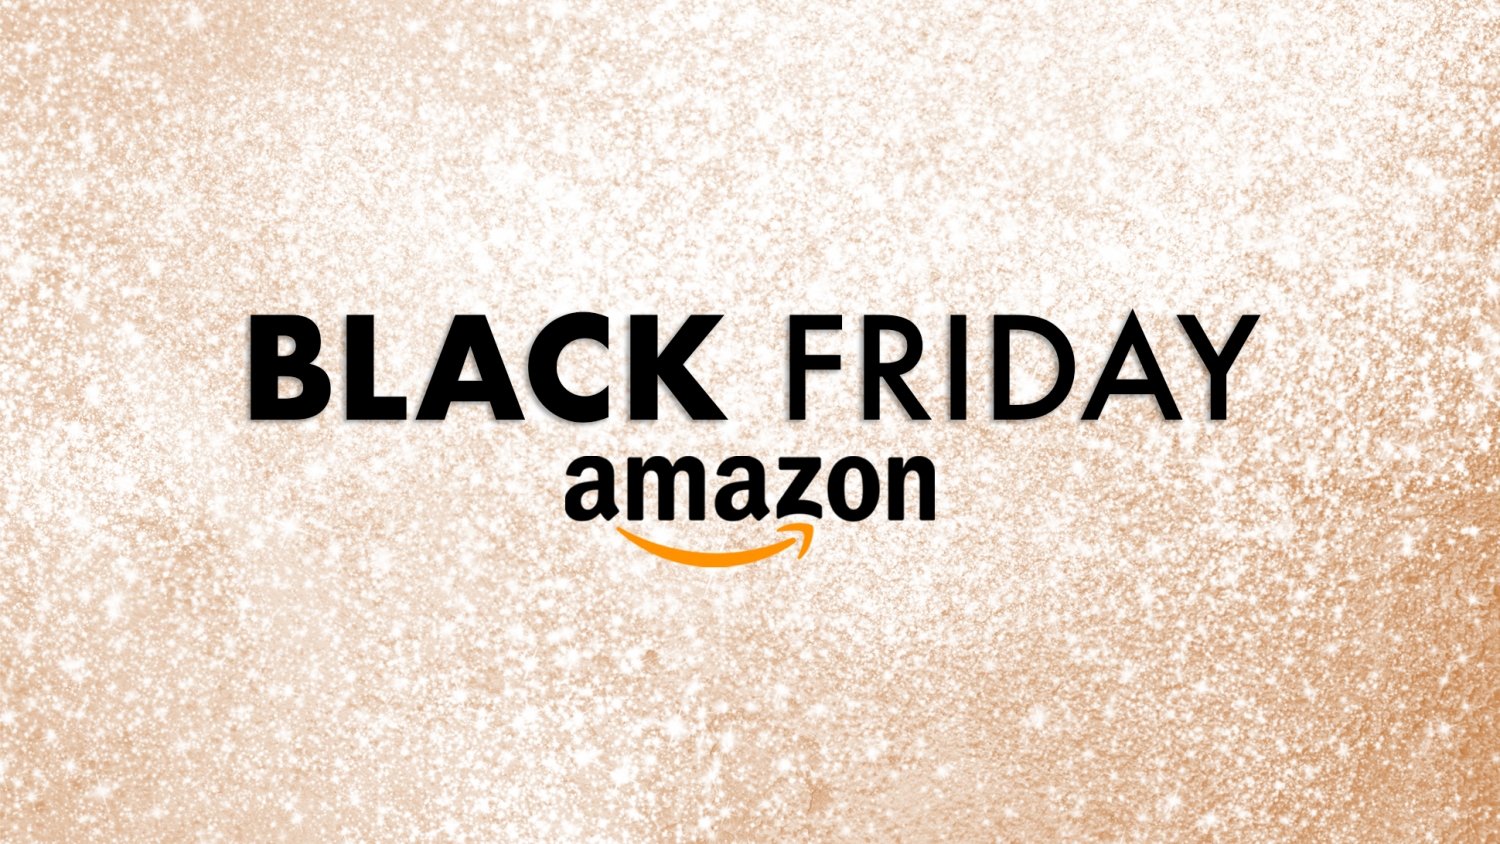 76377_200_early-amazon-black-friday-deals-up-to-30-off-samsung-qled-tvs_full.jpg